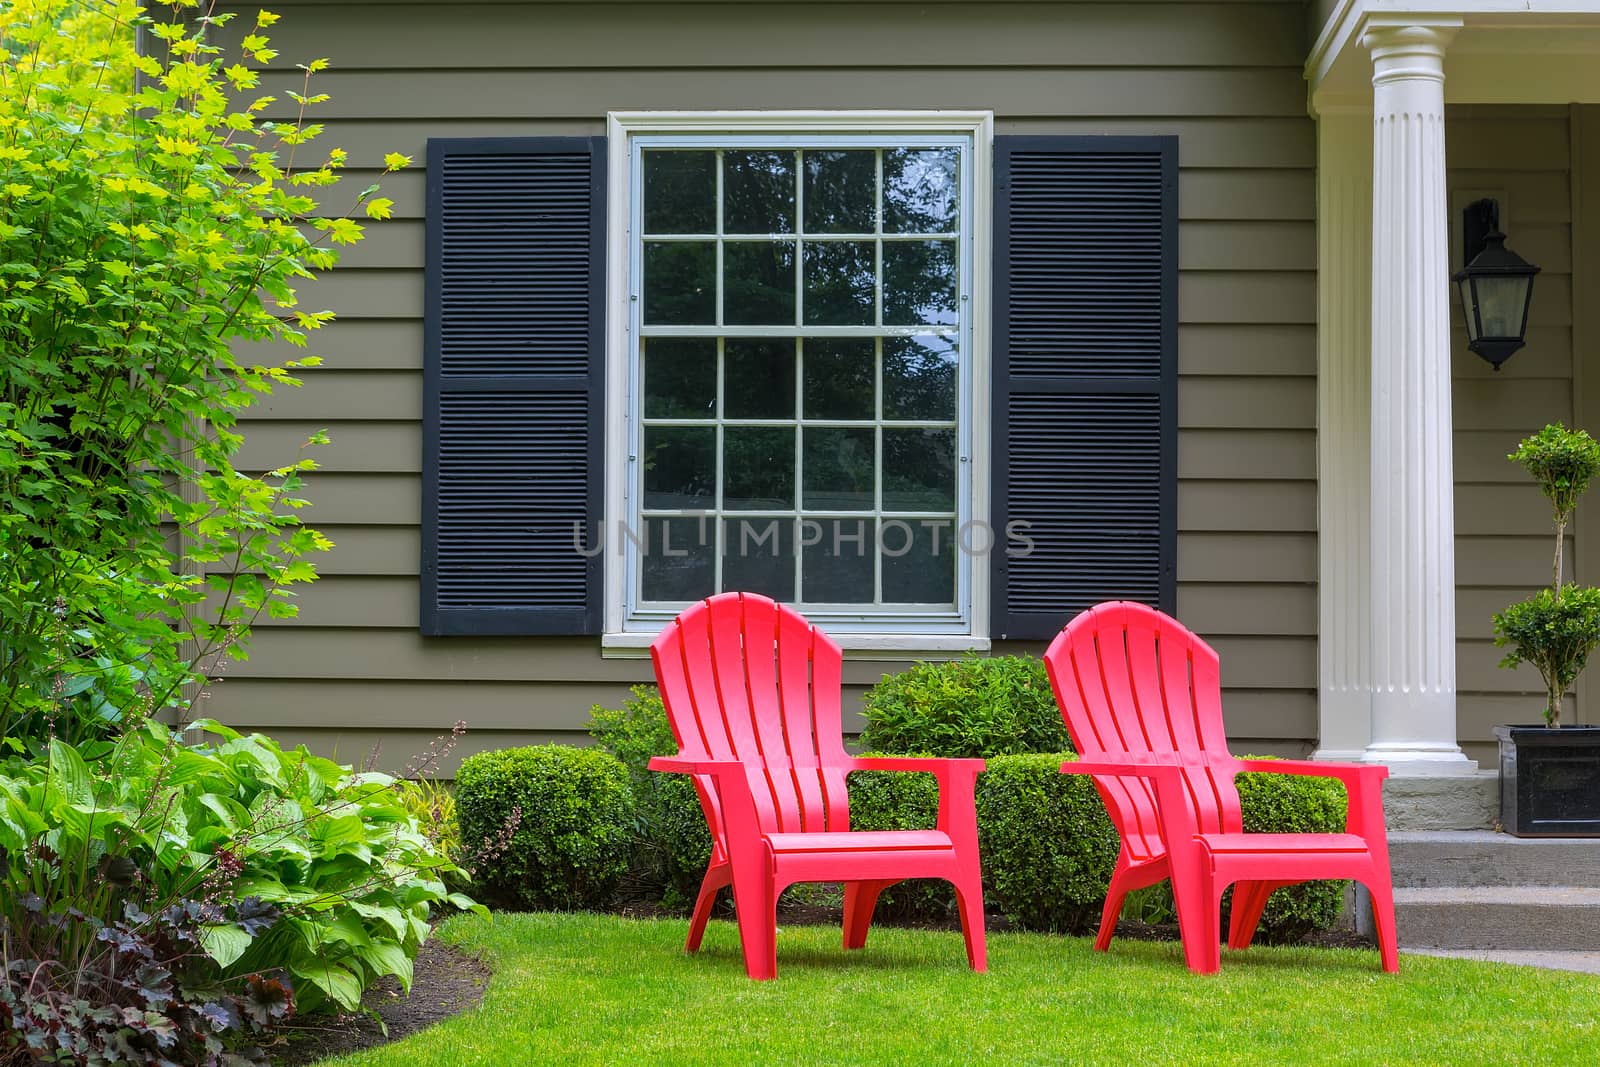 Red outdoor chairs on green grass lawn of house manicured front yard